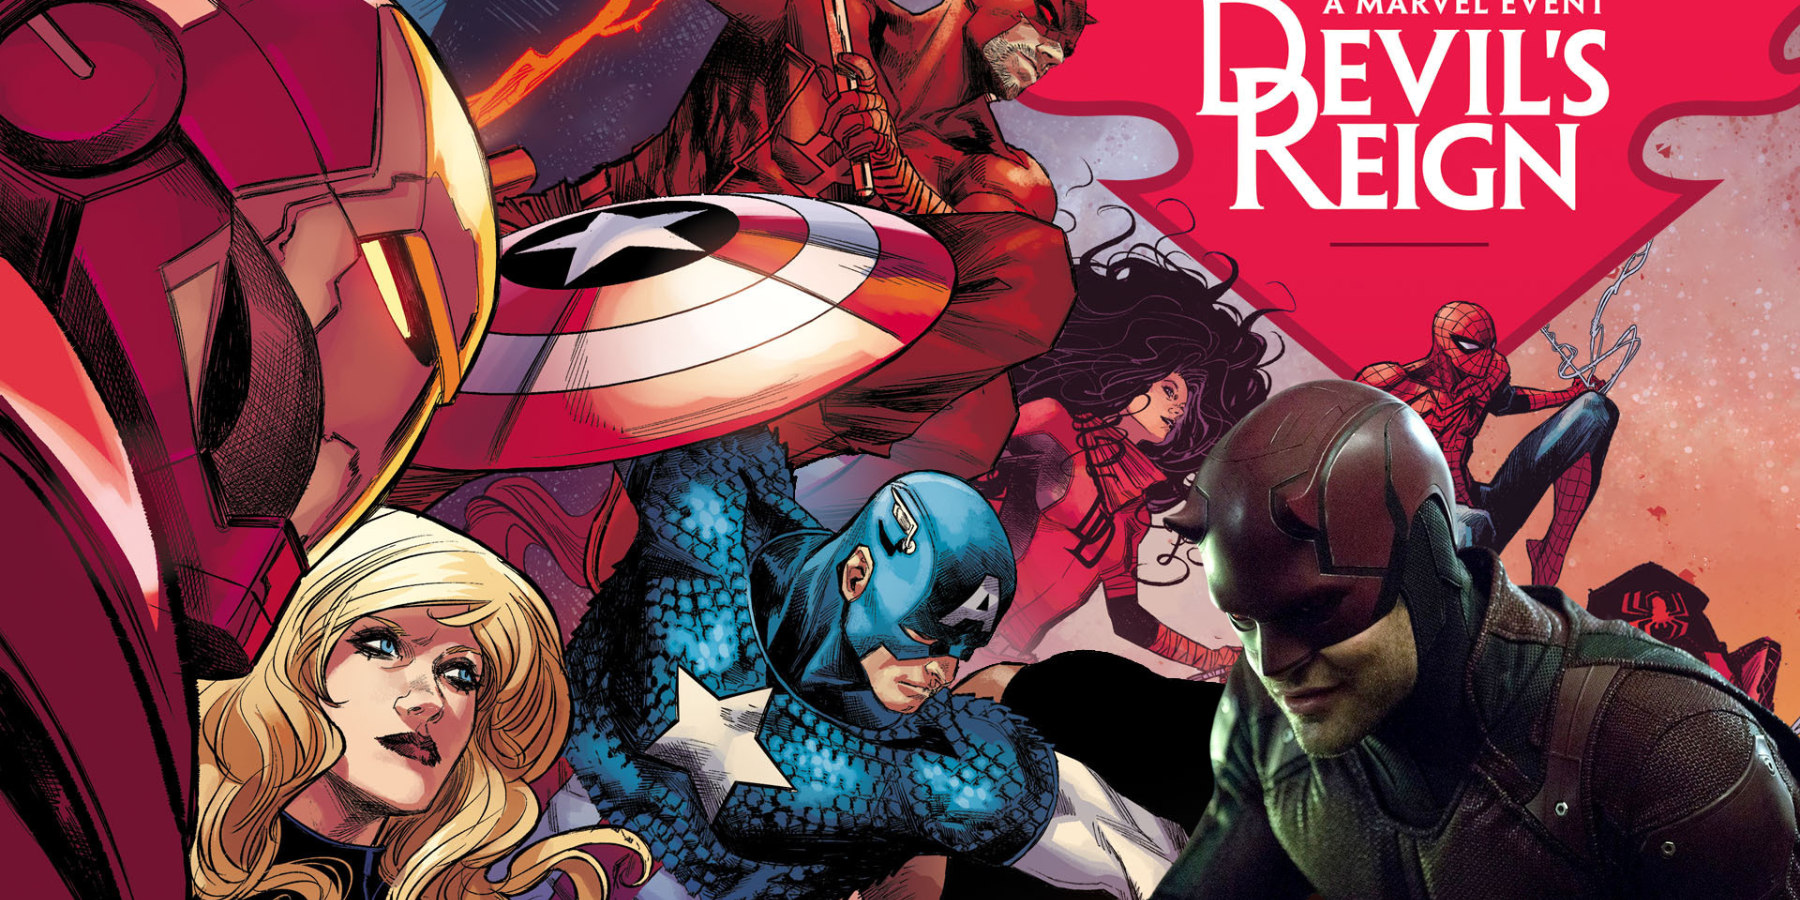 Is the MCU Adapting The Devil's Reign Storyline?